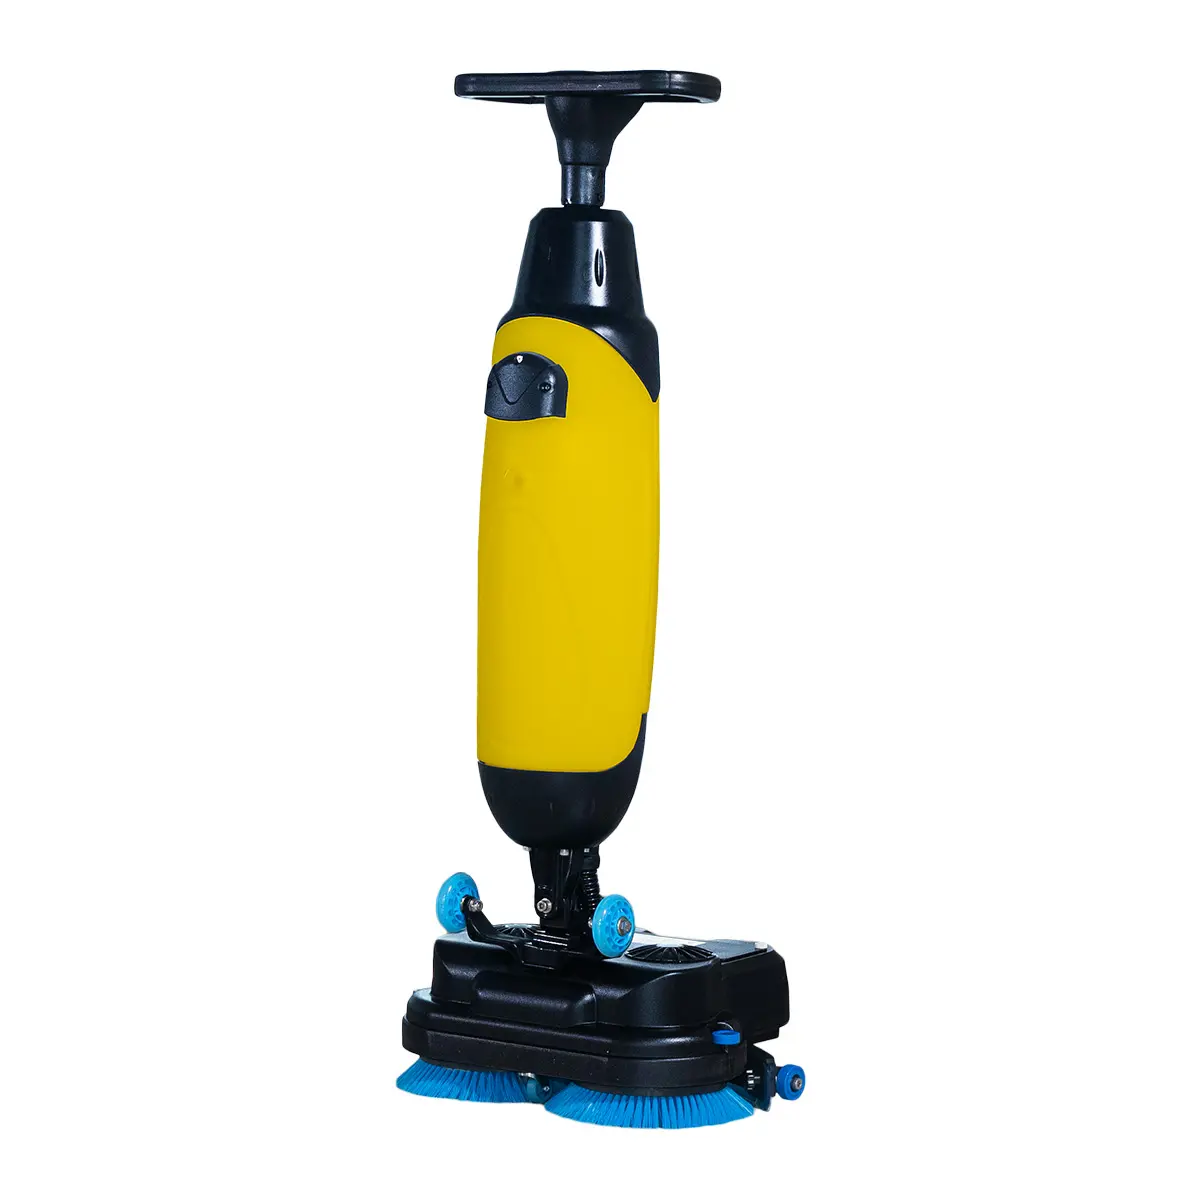 KUER Electric Floor Scrubbers Mini and Concrete Solutions for Efficient Cleaning